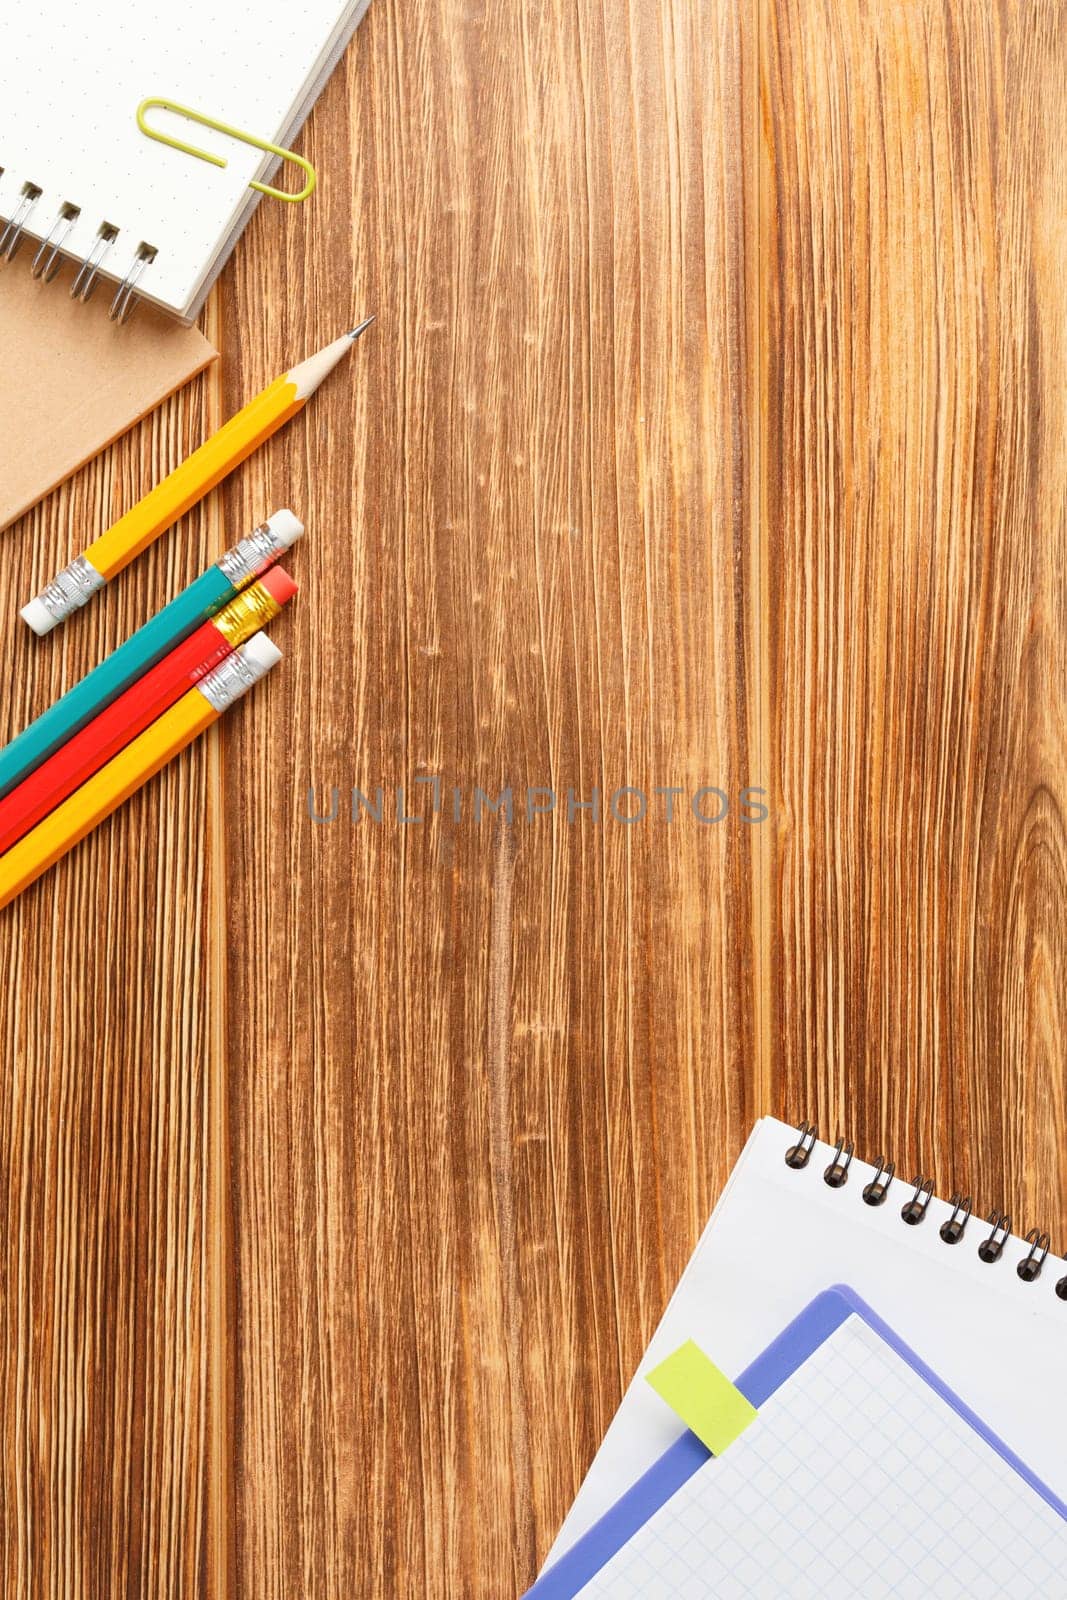 Notepad with school supplies on a wooden desk. by alexxndr